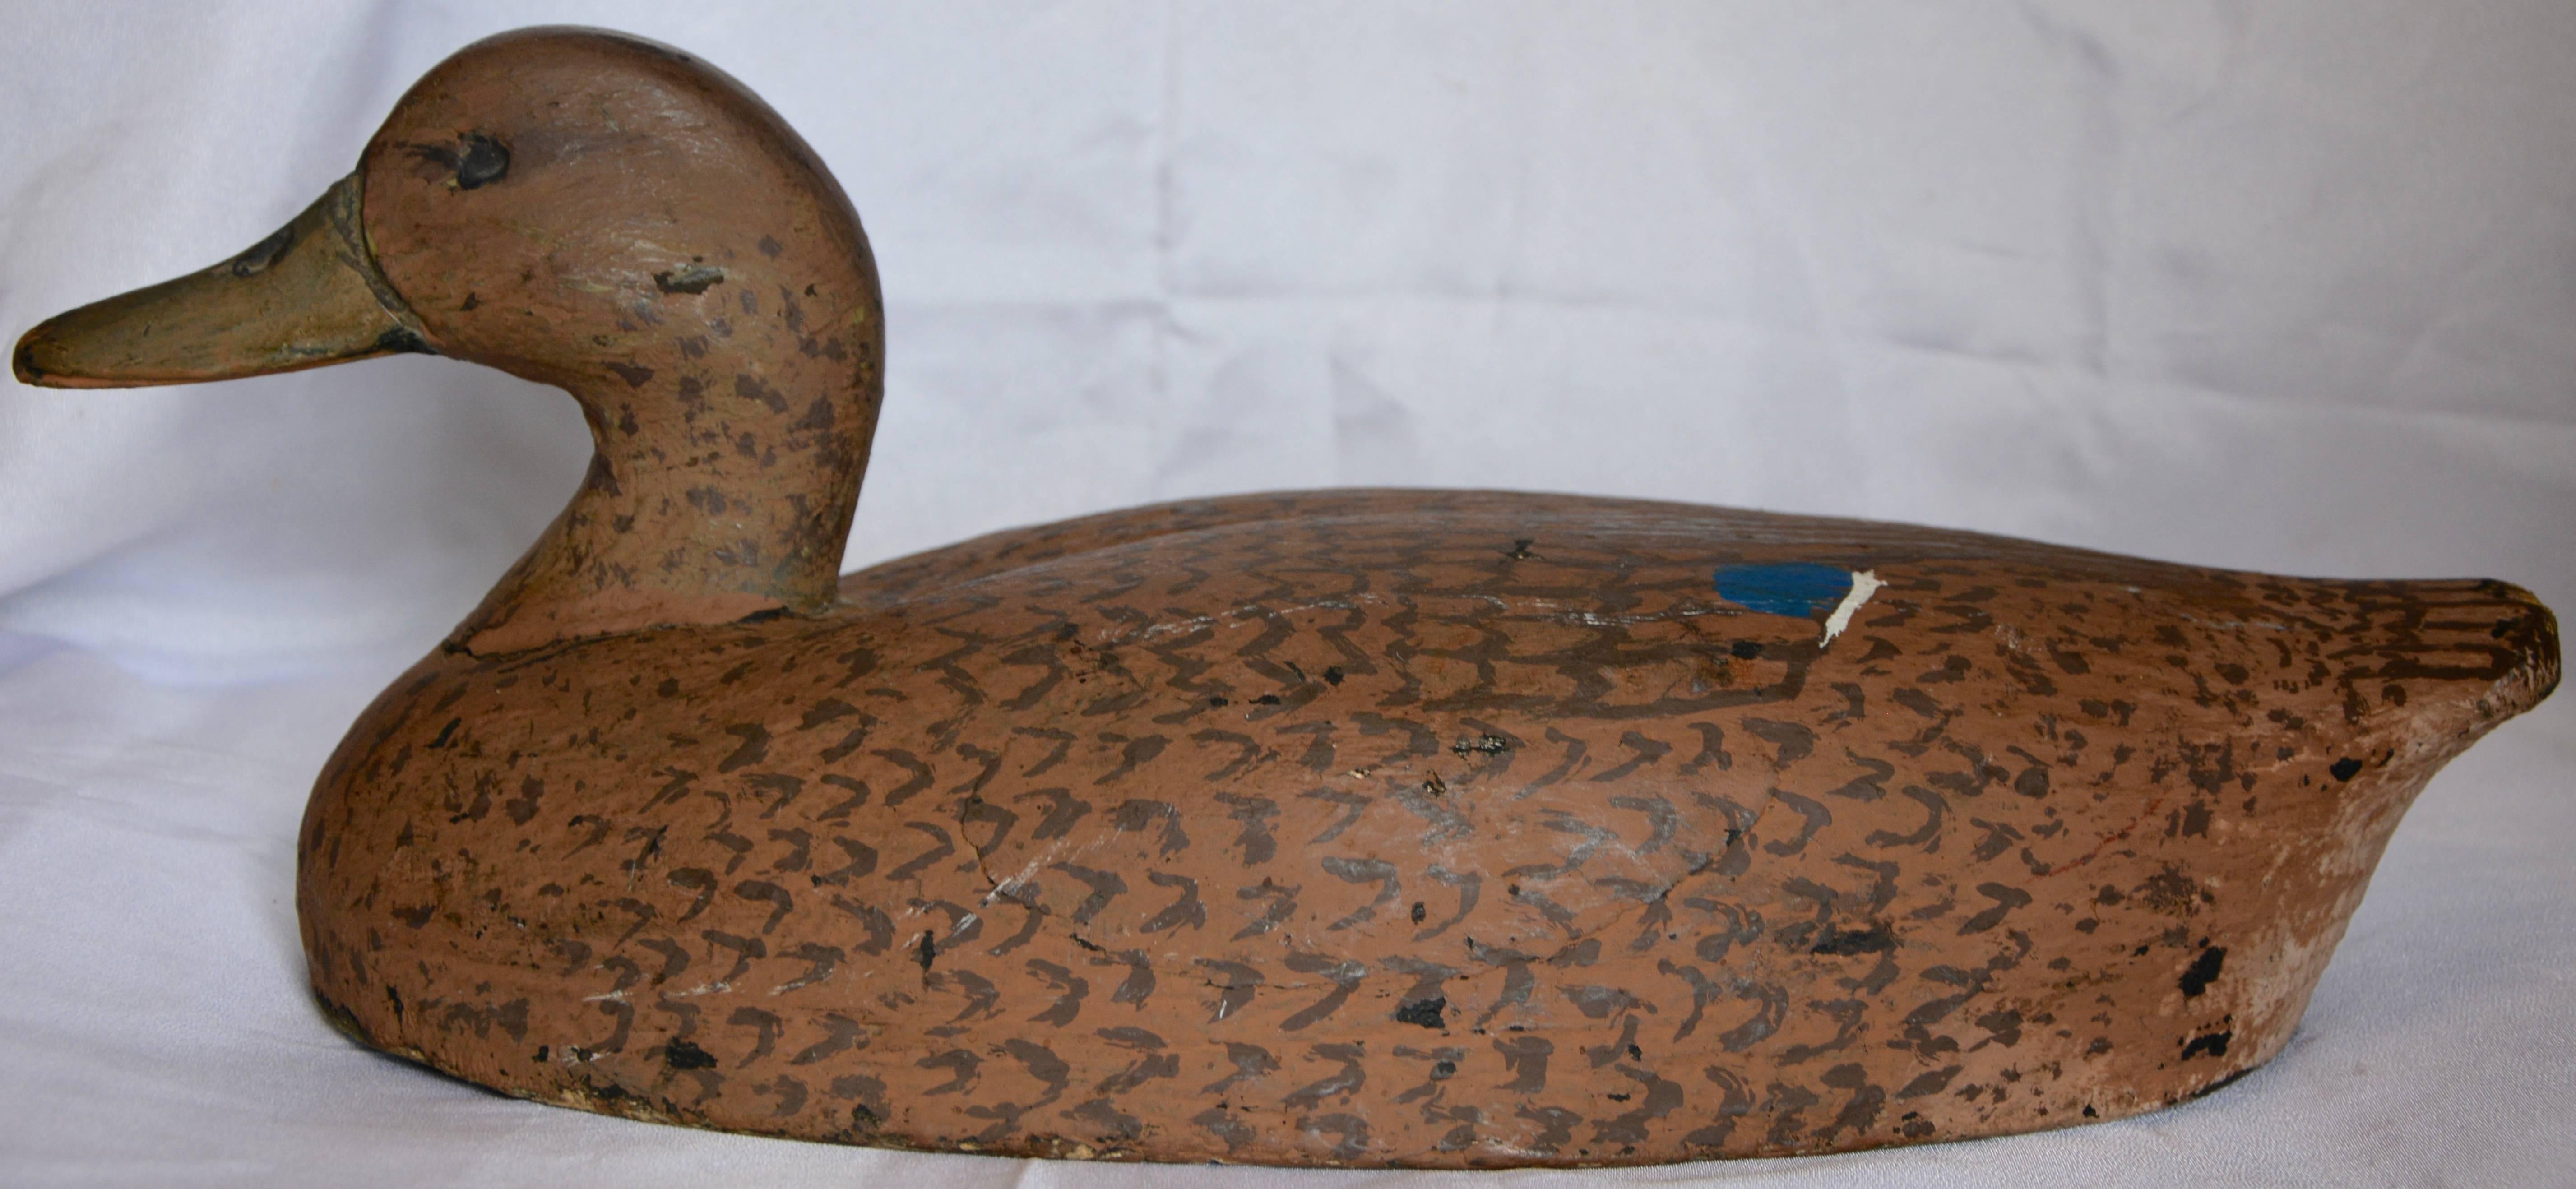 Featured is a hand-carved wooden duck decoy that has been creatively painted by the artist. He is a soft brown with darker brown details for his feathers. The wing tips are highlighted with a splash of blue and white.